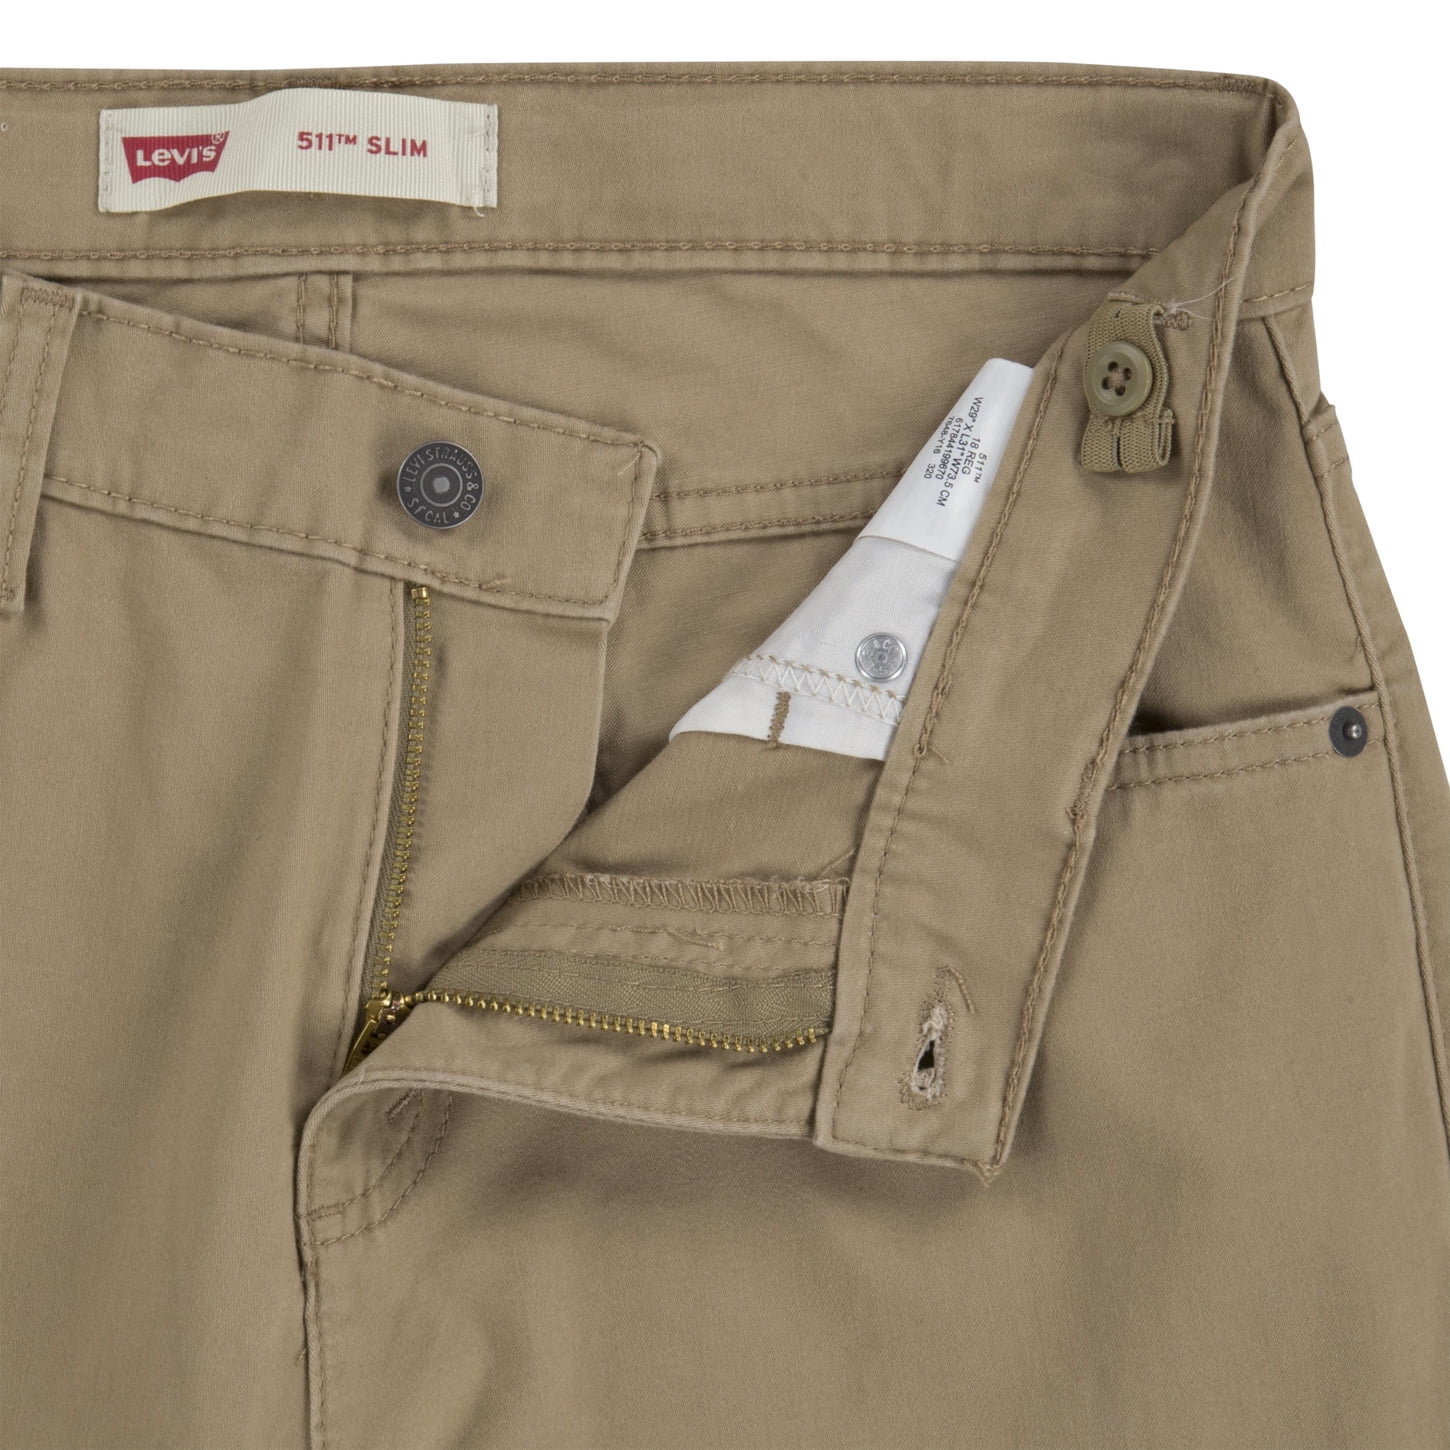 Buy Levis Beige Cotton Slim Fit Solid Trousers for Mens Online @ Tata CLiQ